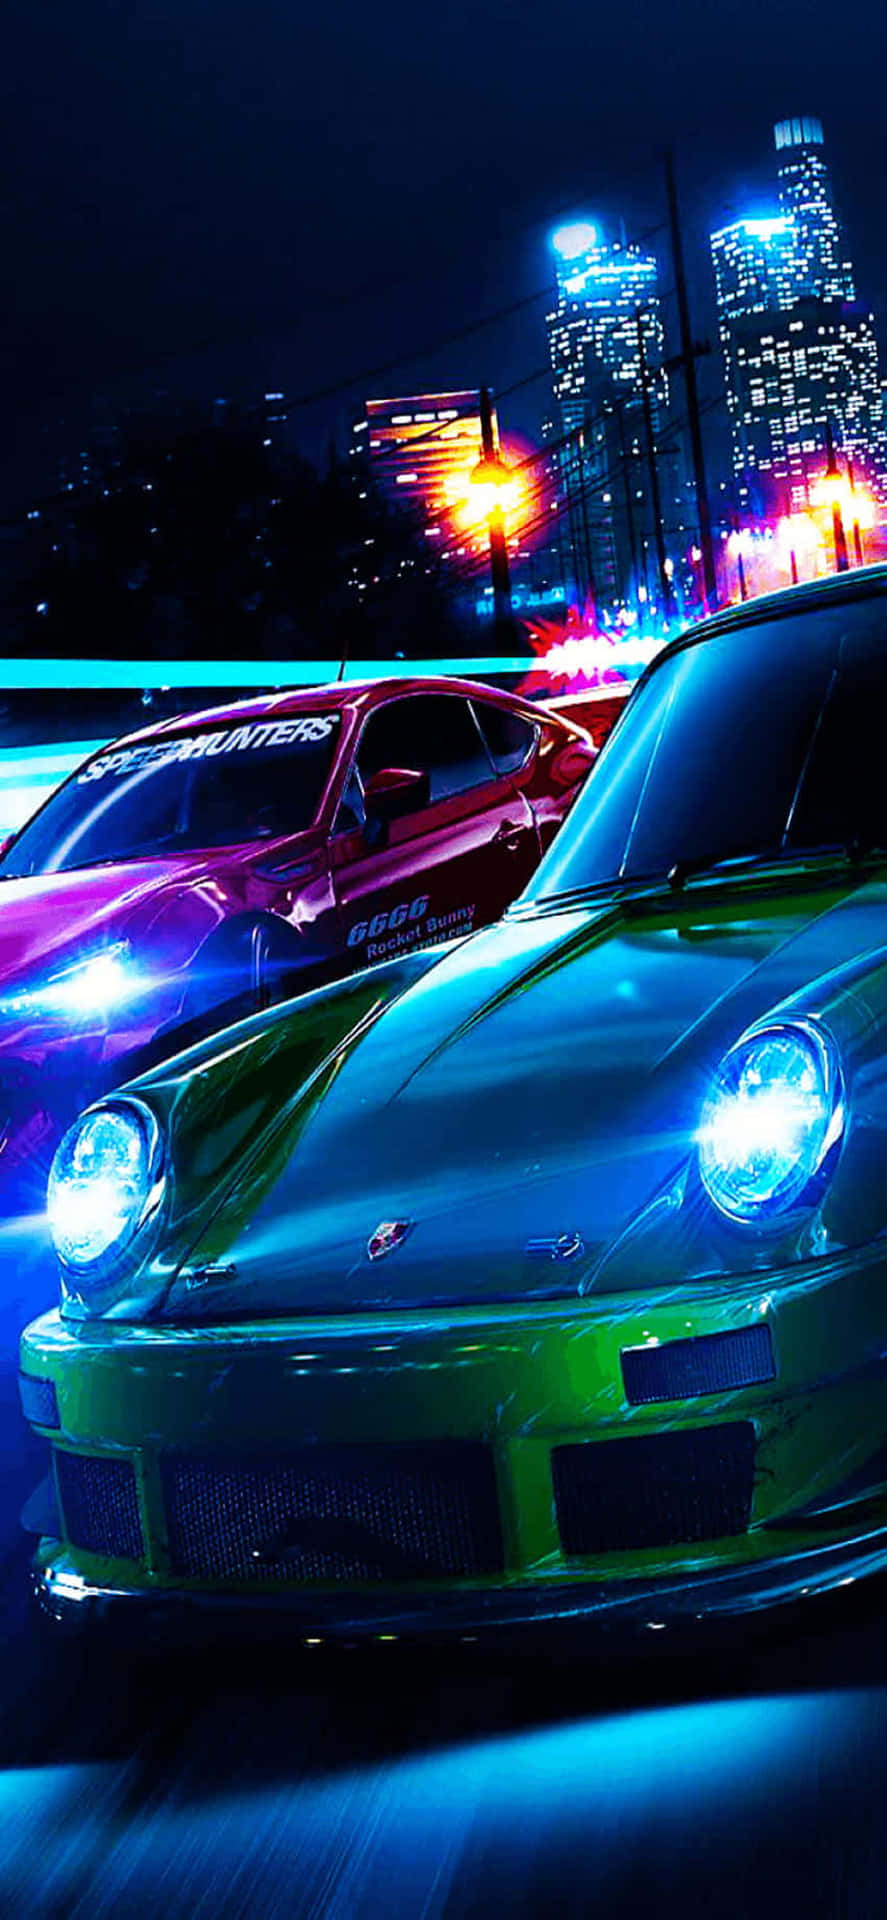 Rev up the engine and get ready to take on fierce competition in Need for Speed Heat